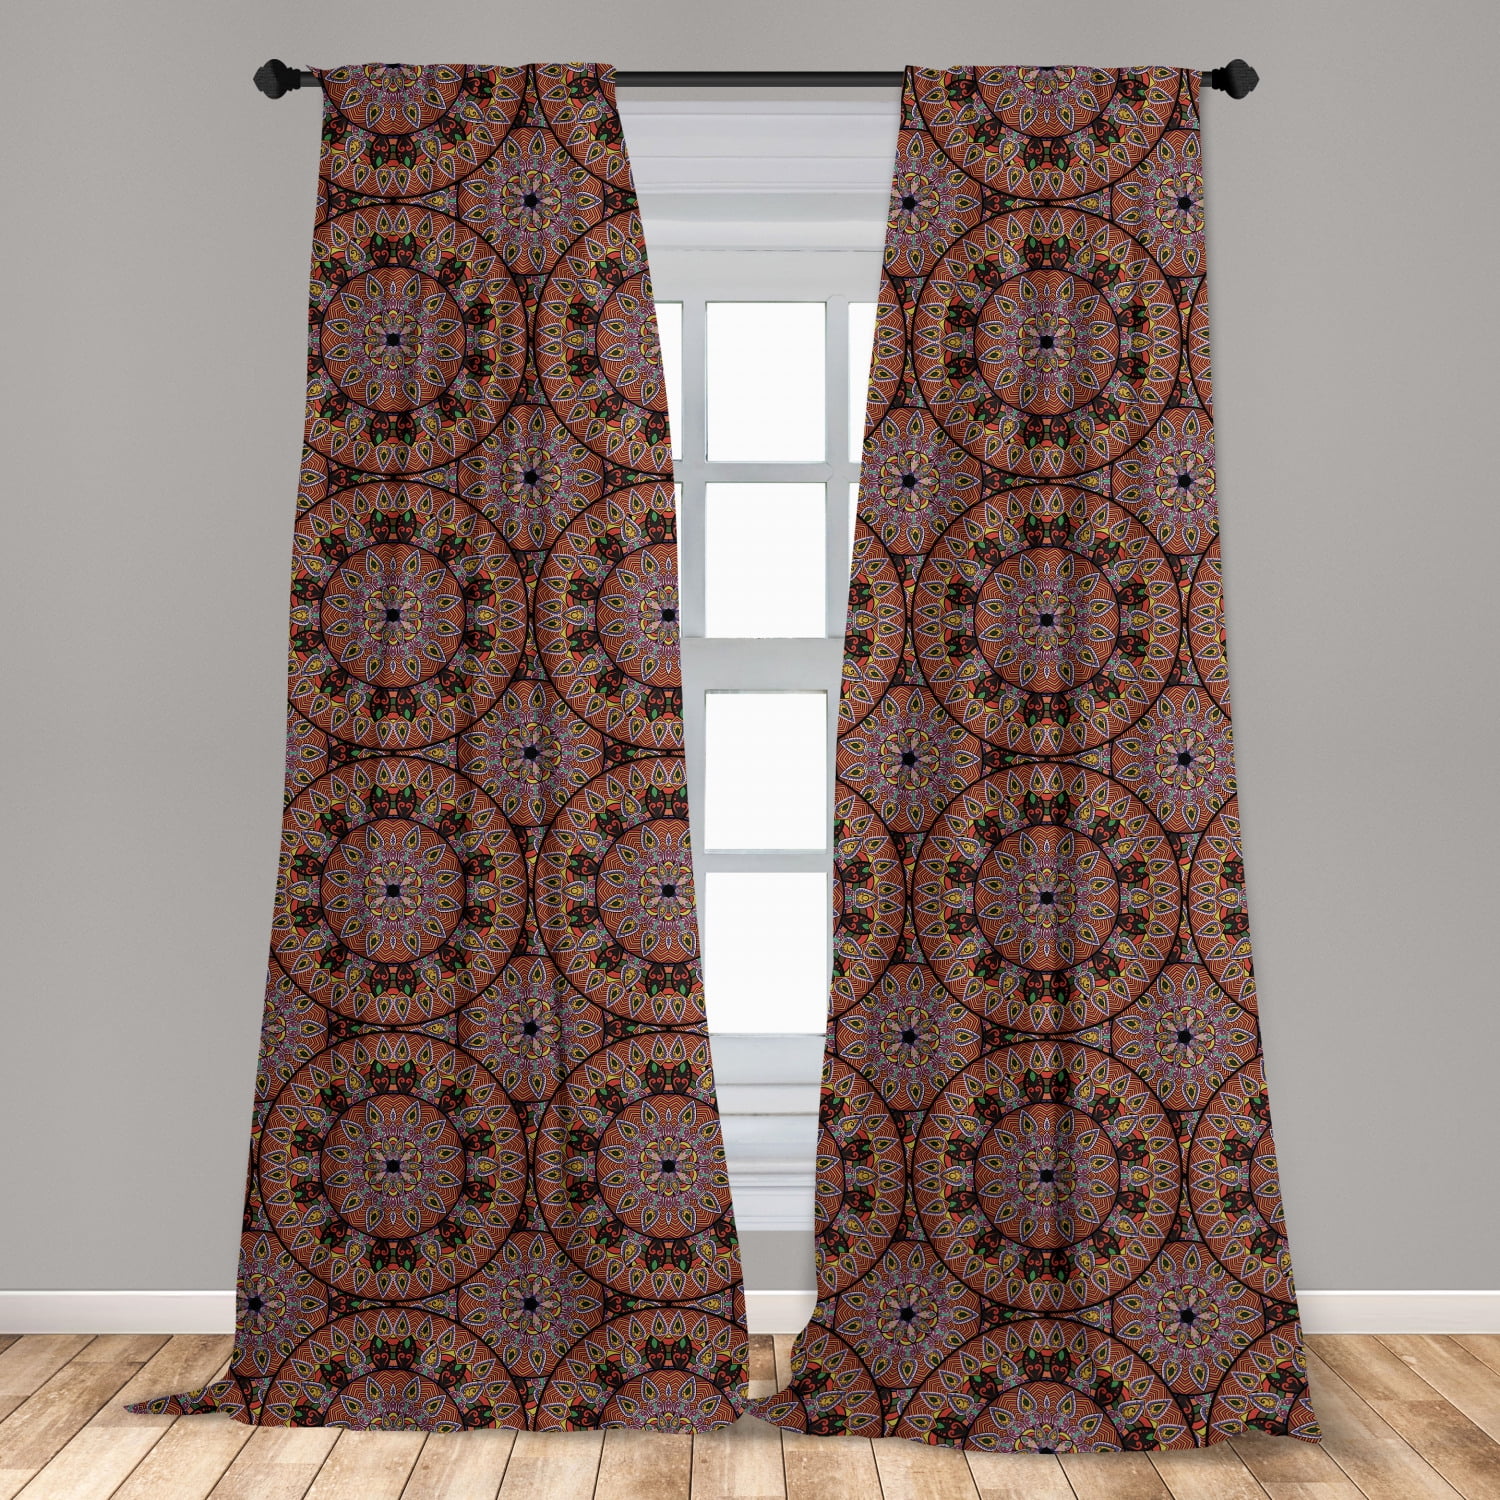 Bohemian Curtains 2 Panels Set Colorful Round With Floral Details Traditional Peruvian Motifs Window Drapes For Living Room Bedroom 56 W X 95 L Multicolor By Ambesonne Walmart Com Walmart Com